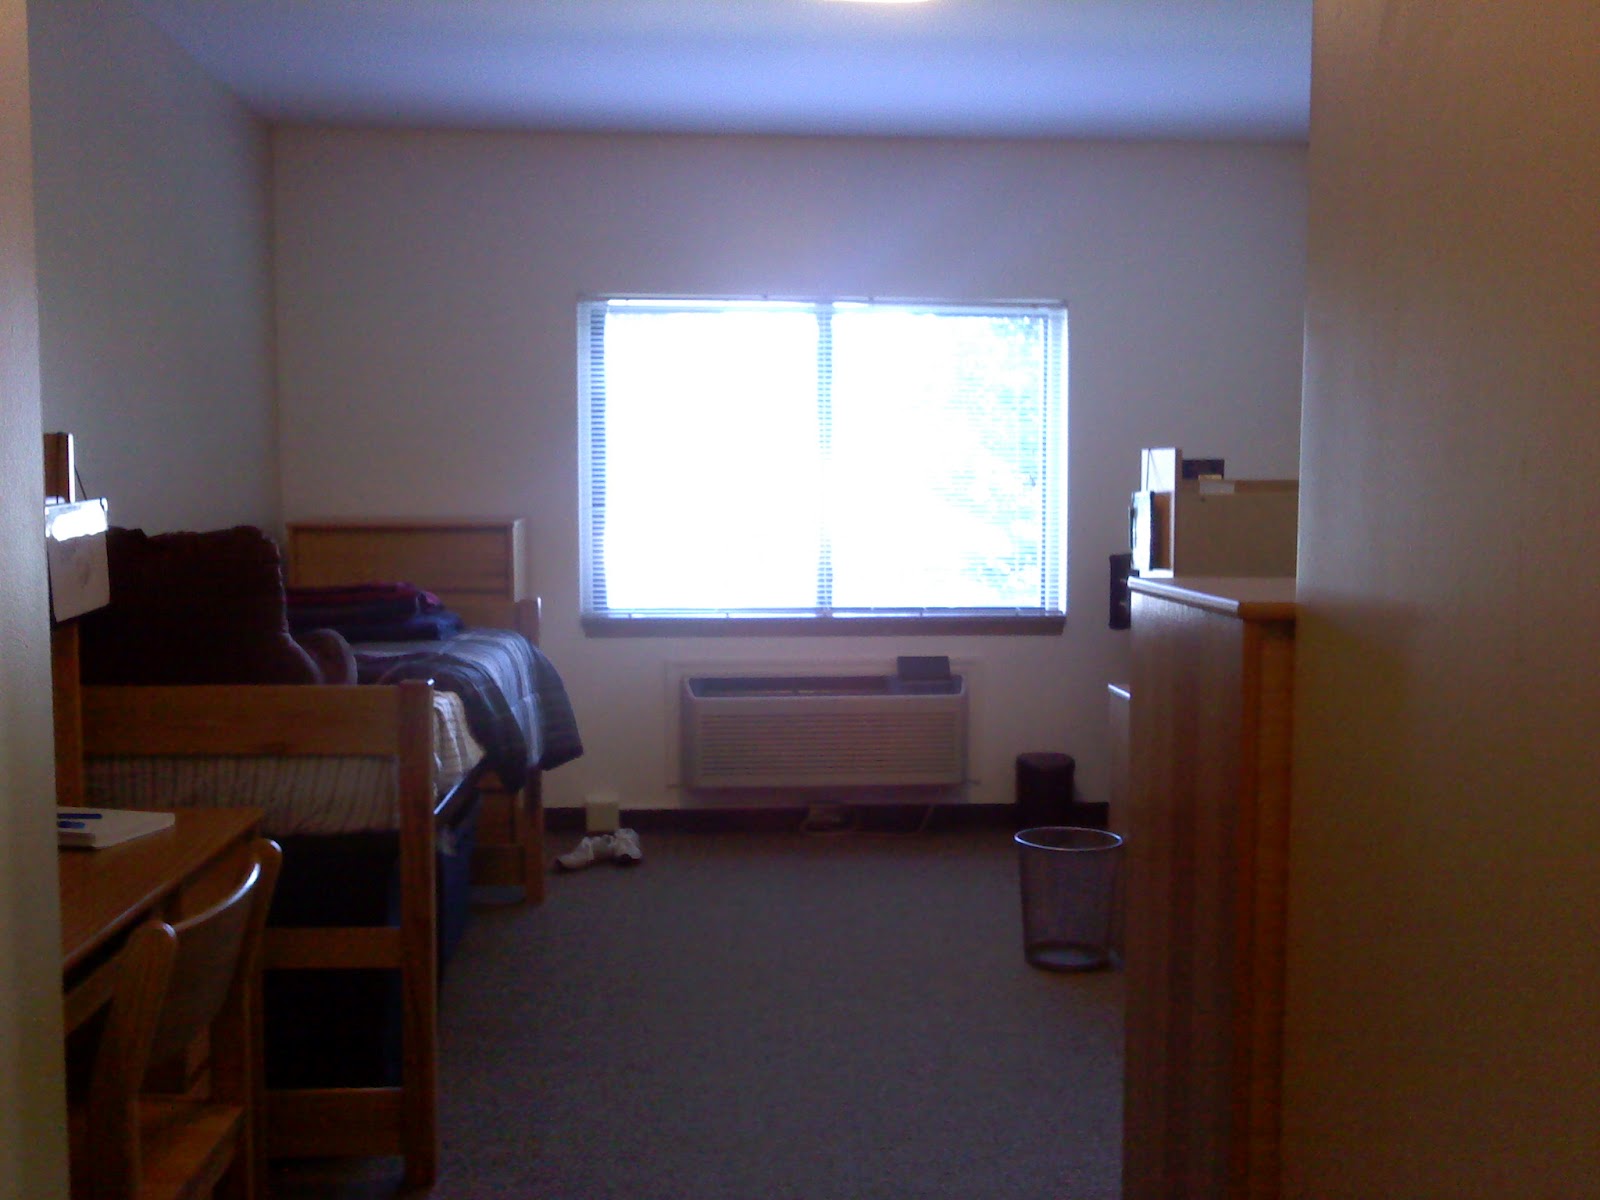 south hall furnished dorm room with bedding